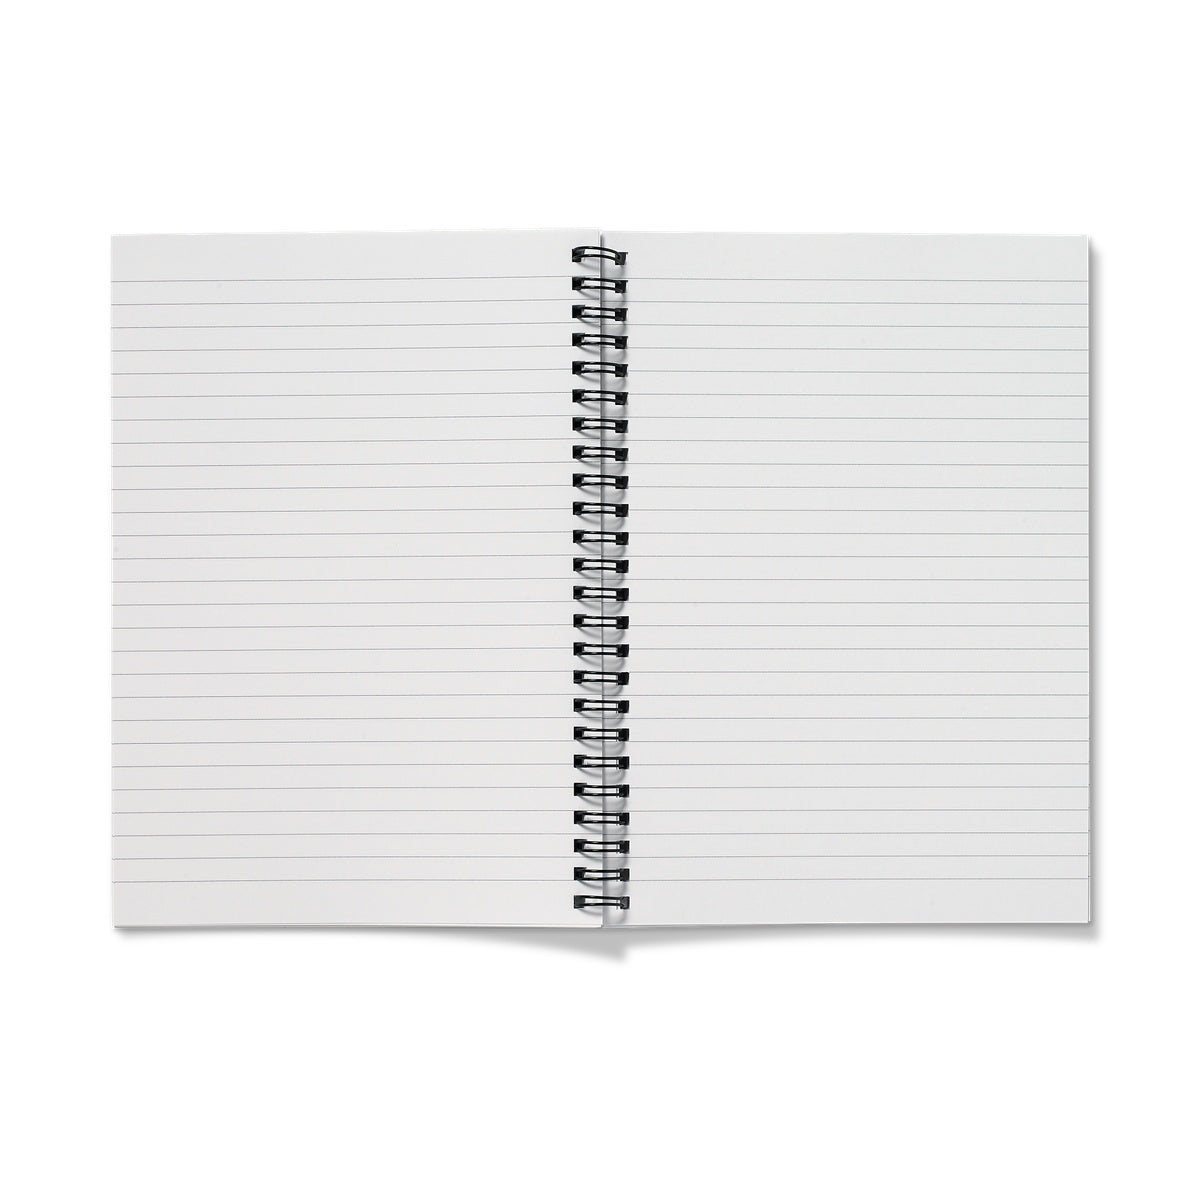 Count Your Stripes Notebook